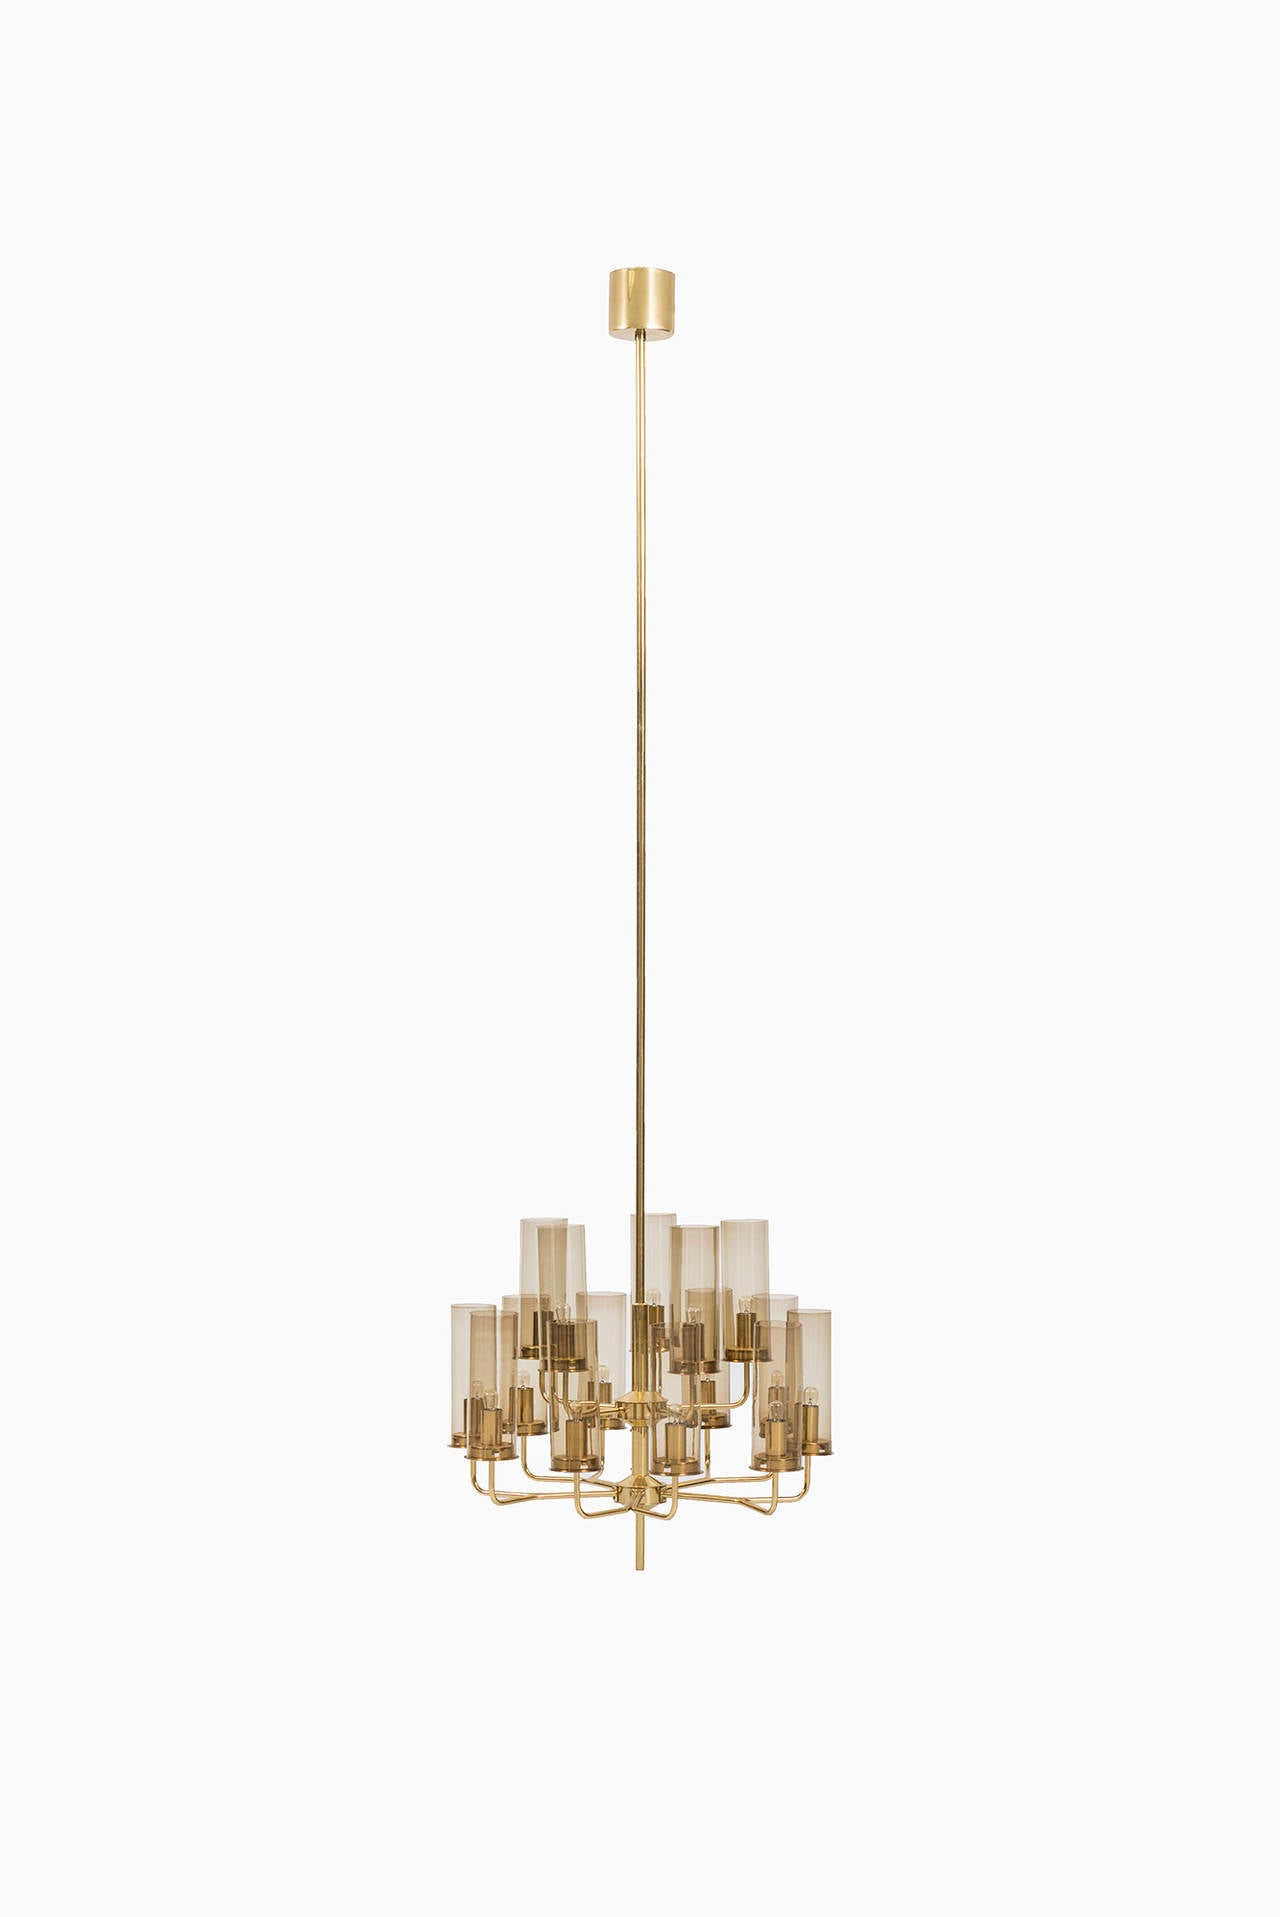 Big Pair of Hans-Agne Jakobsson Ceiling Lamps in Brass and Glass 5